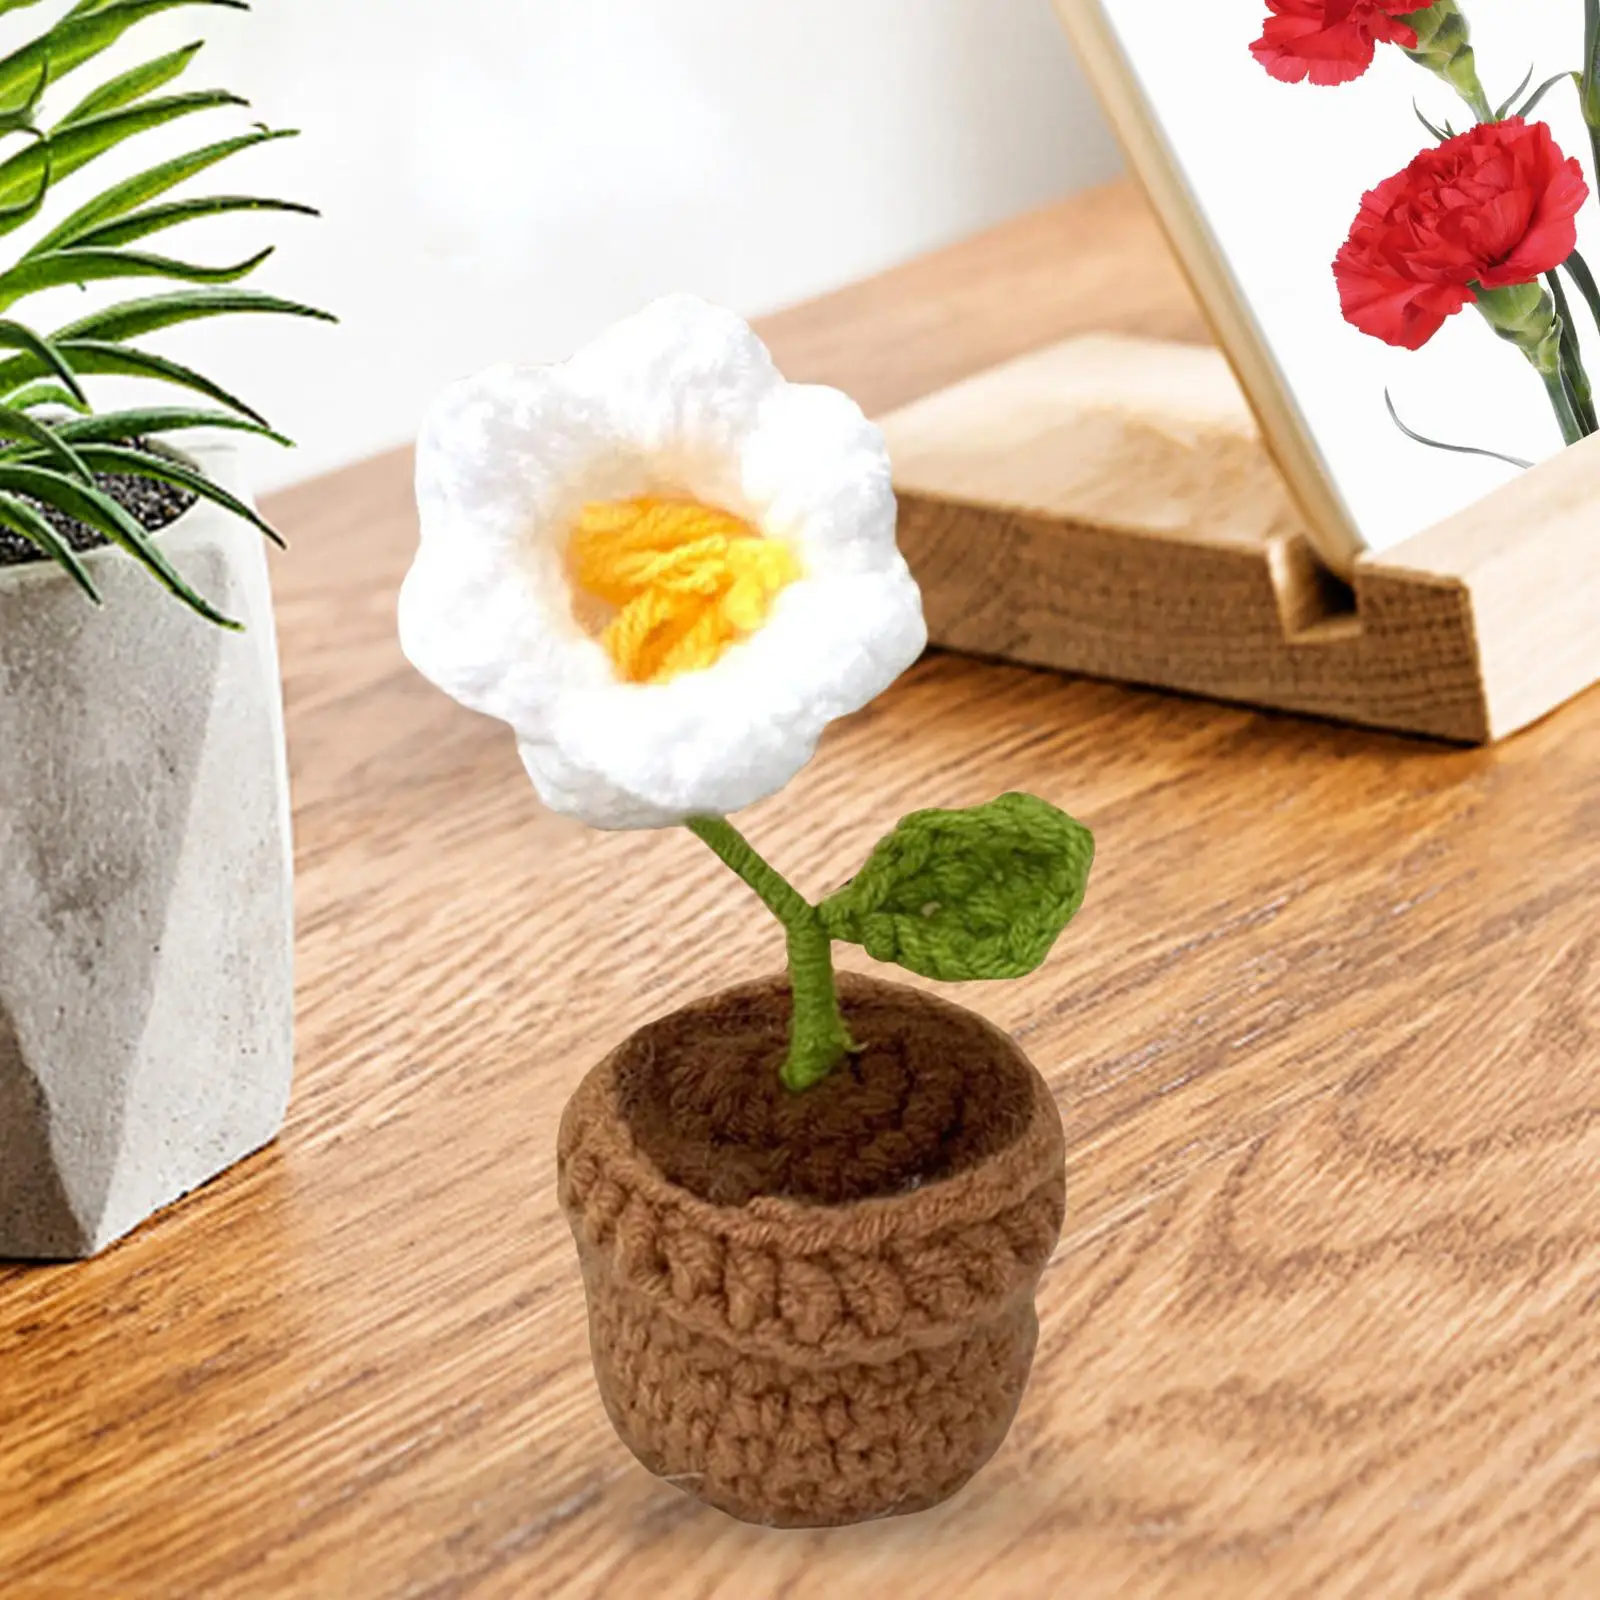 Handmade Crochet Flowers Car Accessories Flowerpot Mini Potted Flowers Dashboard Decoration for Indoor Ornament Birthday Gift